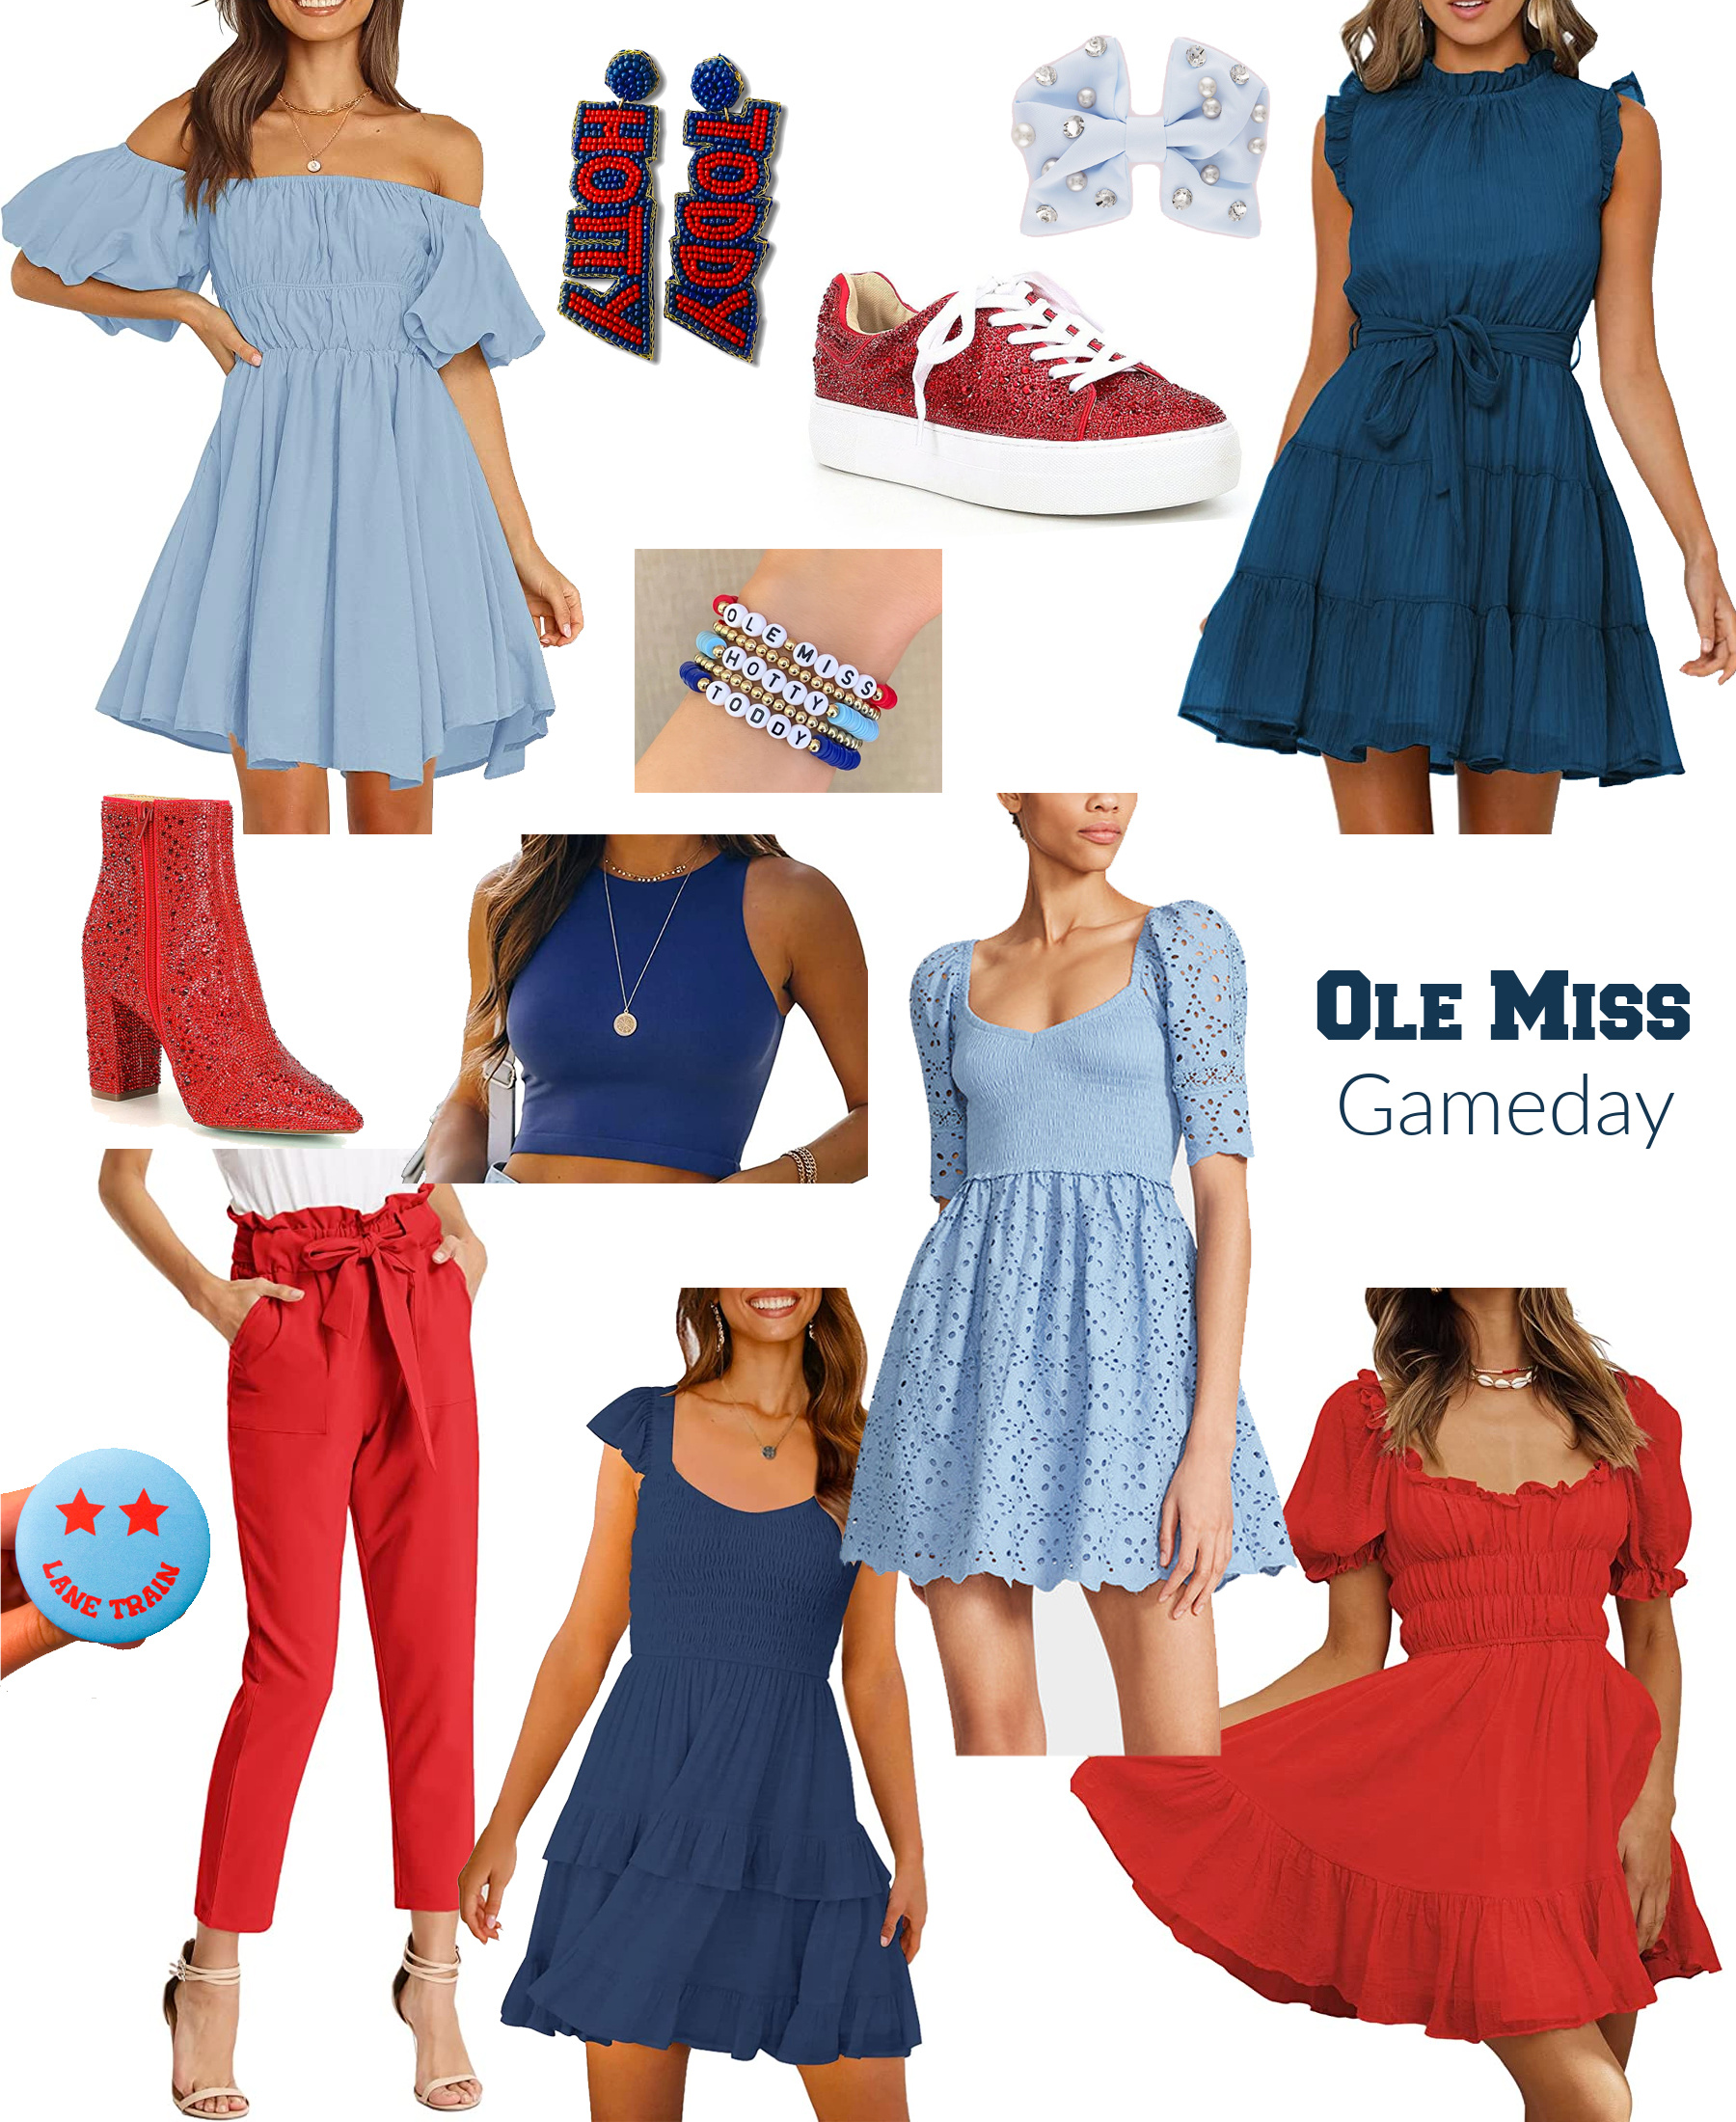 ole-miss-gameday-outfits 